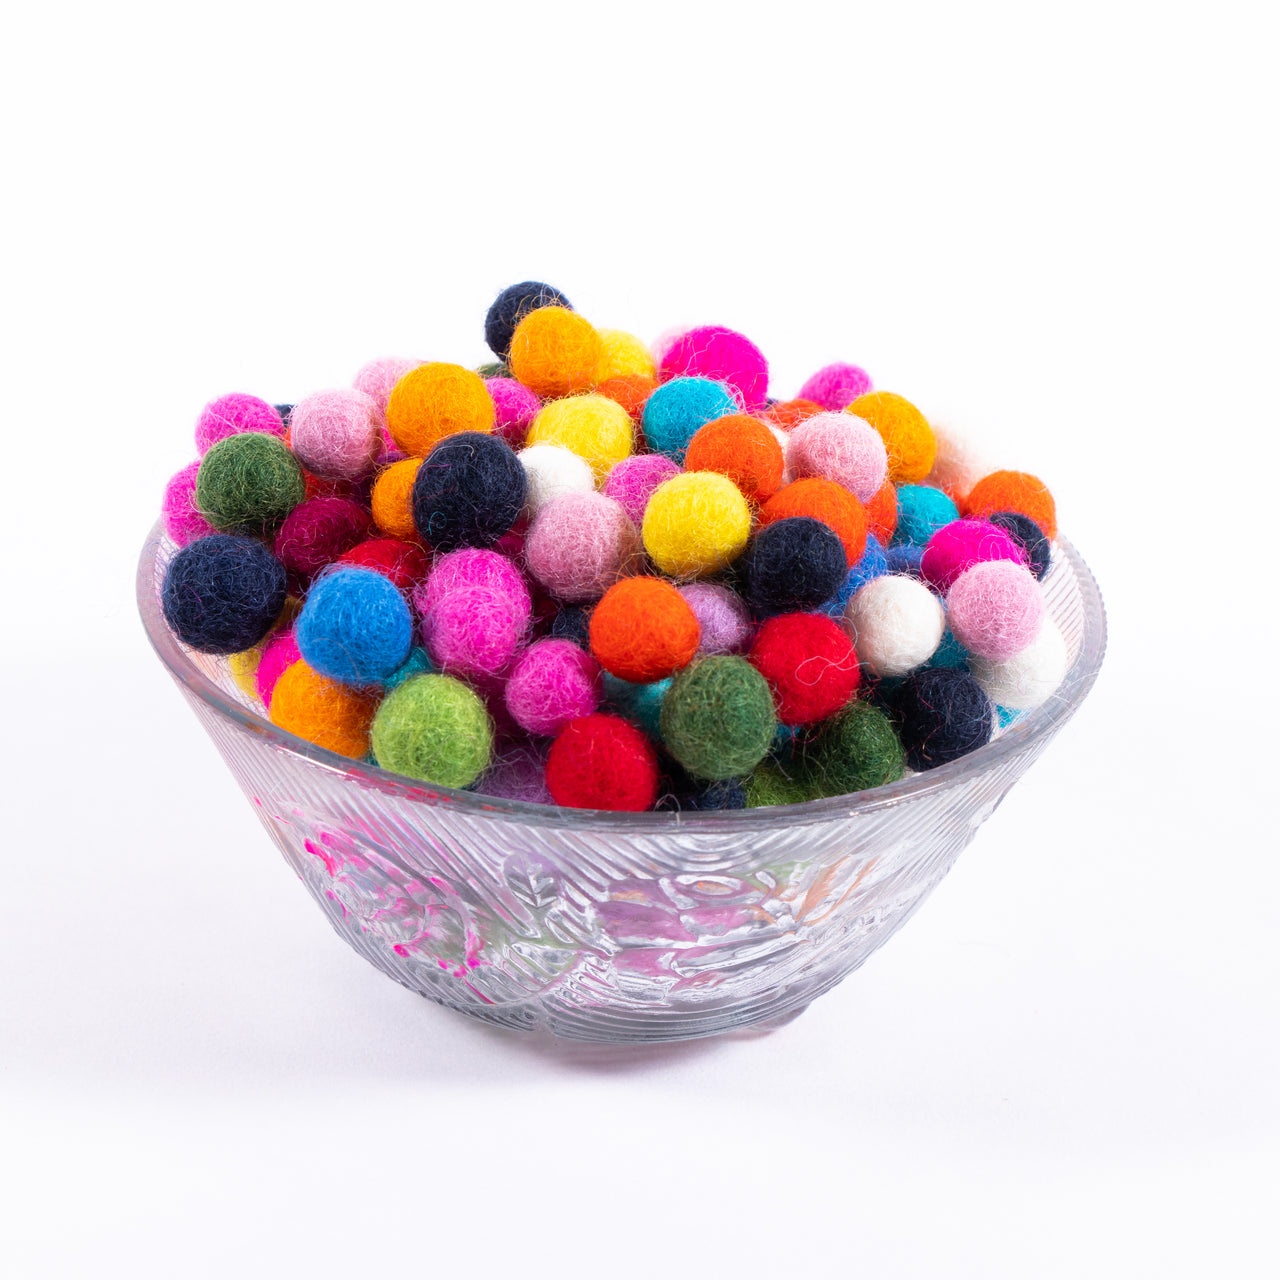 Wool Felt Ball for DIY Arts and Crafts - 0.6 Inch Wool Balls in Assorted  Colors - Bulk Tiny Puff Balls for Felting and Garland